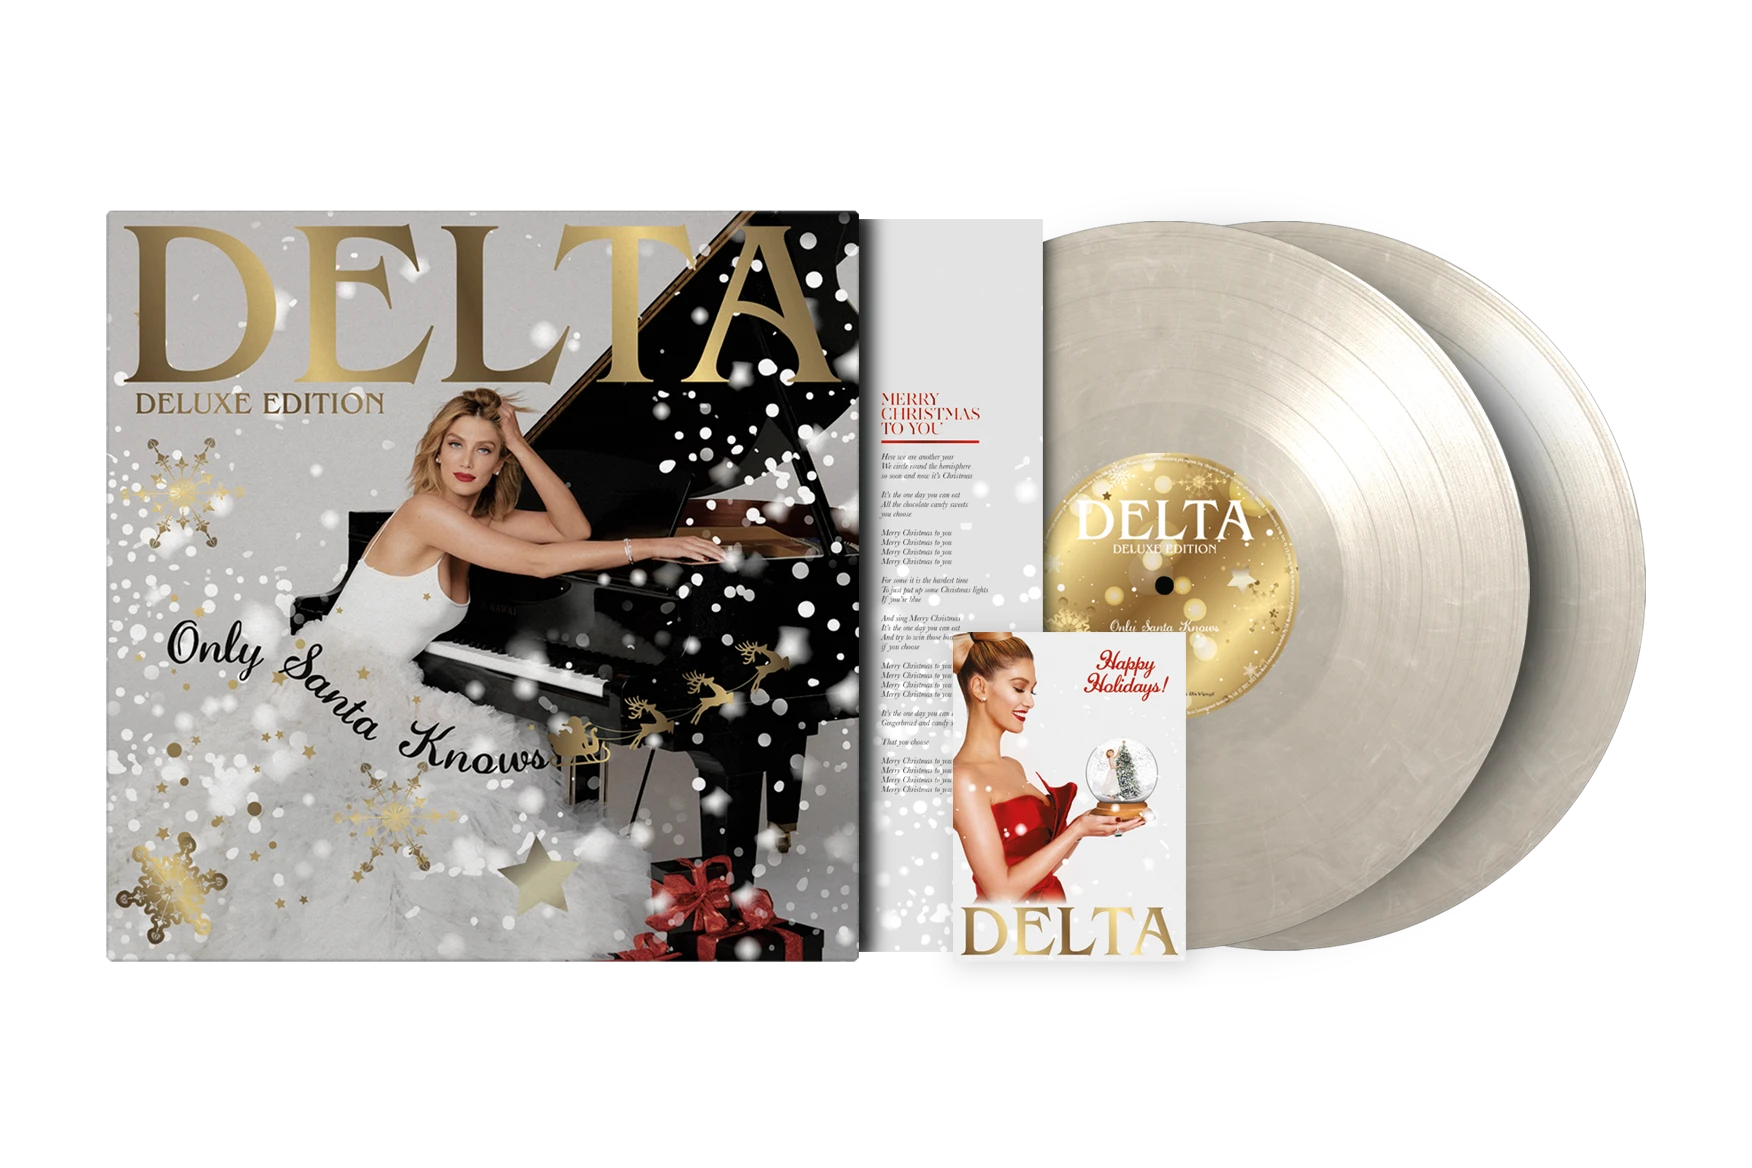 Delta Goodrem - Only Santa Knows (Deluxe Edition)